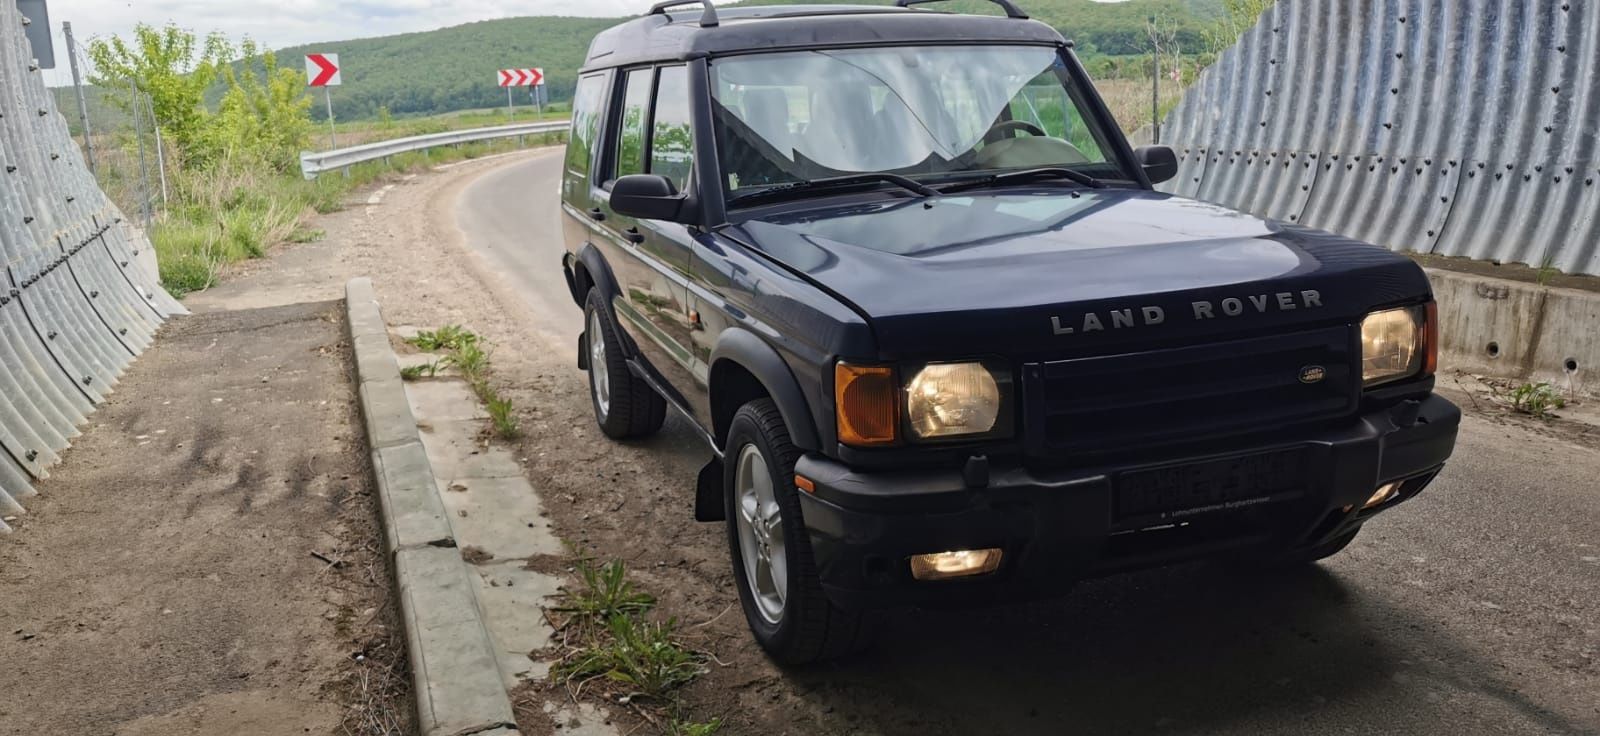 Land rover Discovery 2.5 tdi an Urgent2000 4x4